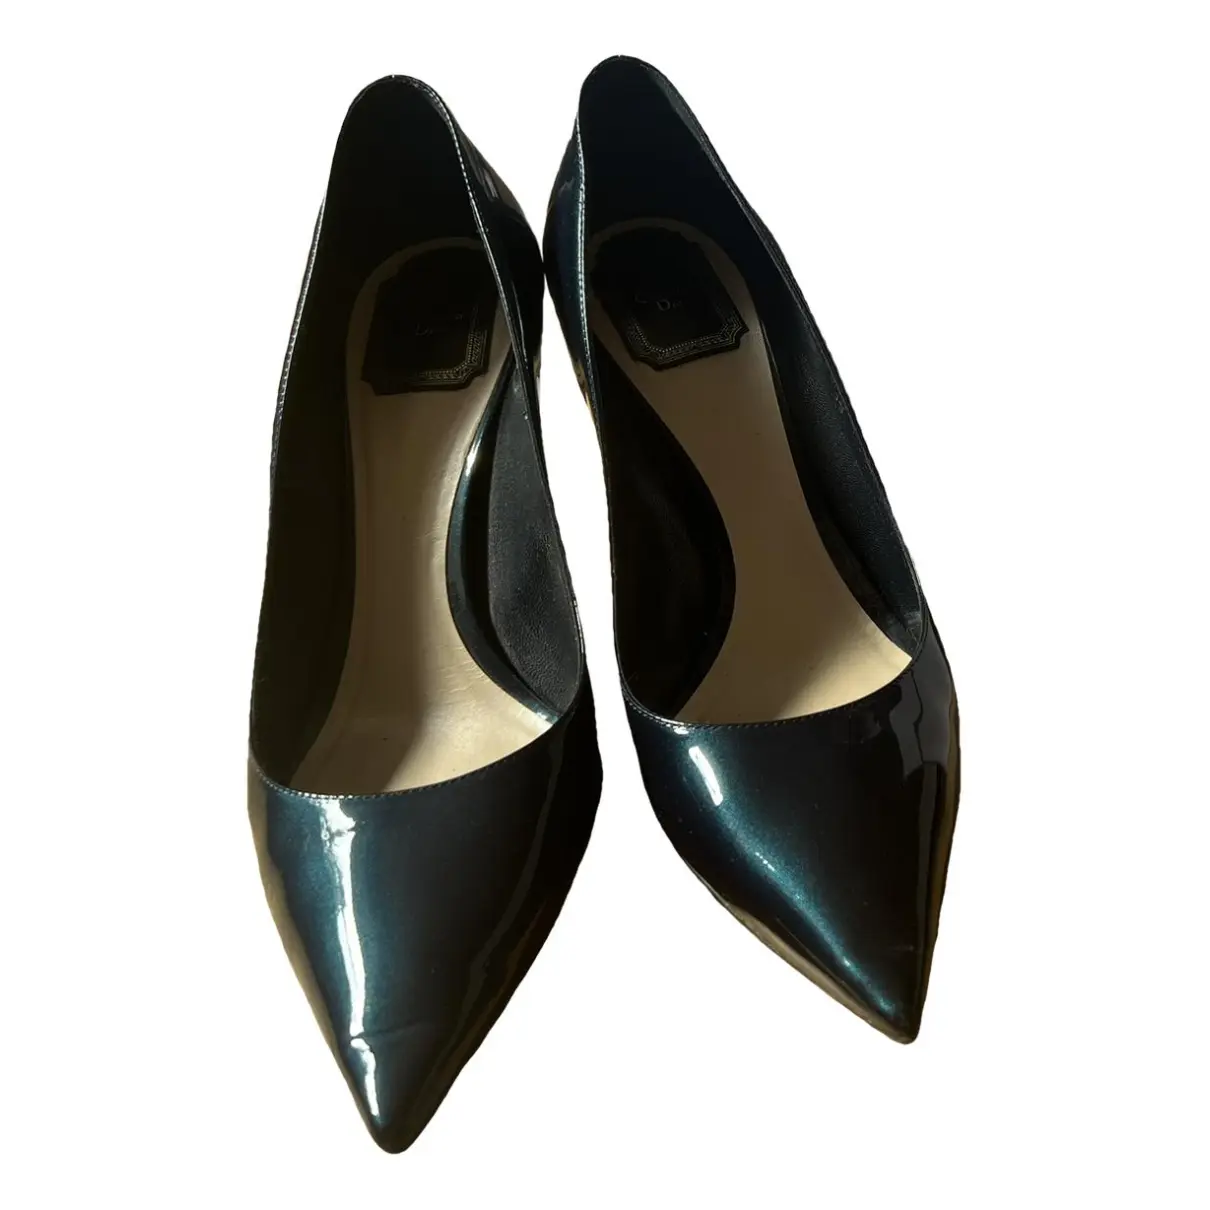 Dior Cherie Pointy Pump patent leather heels